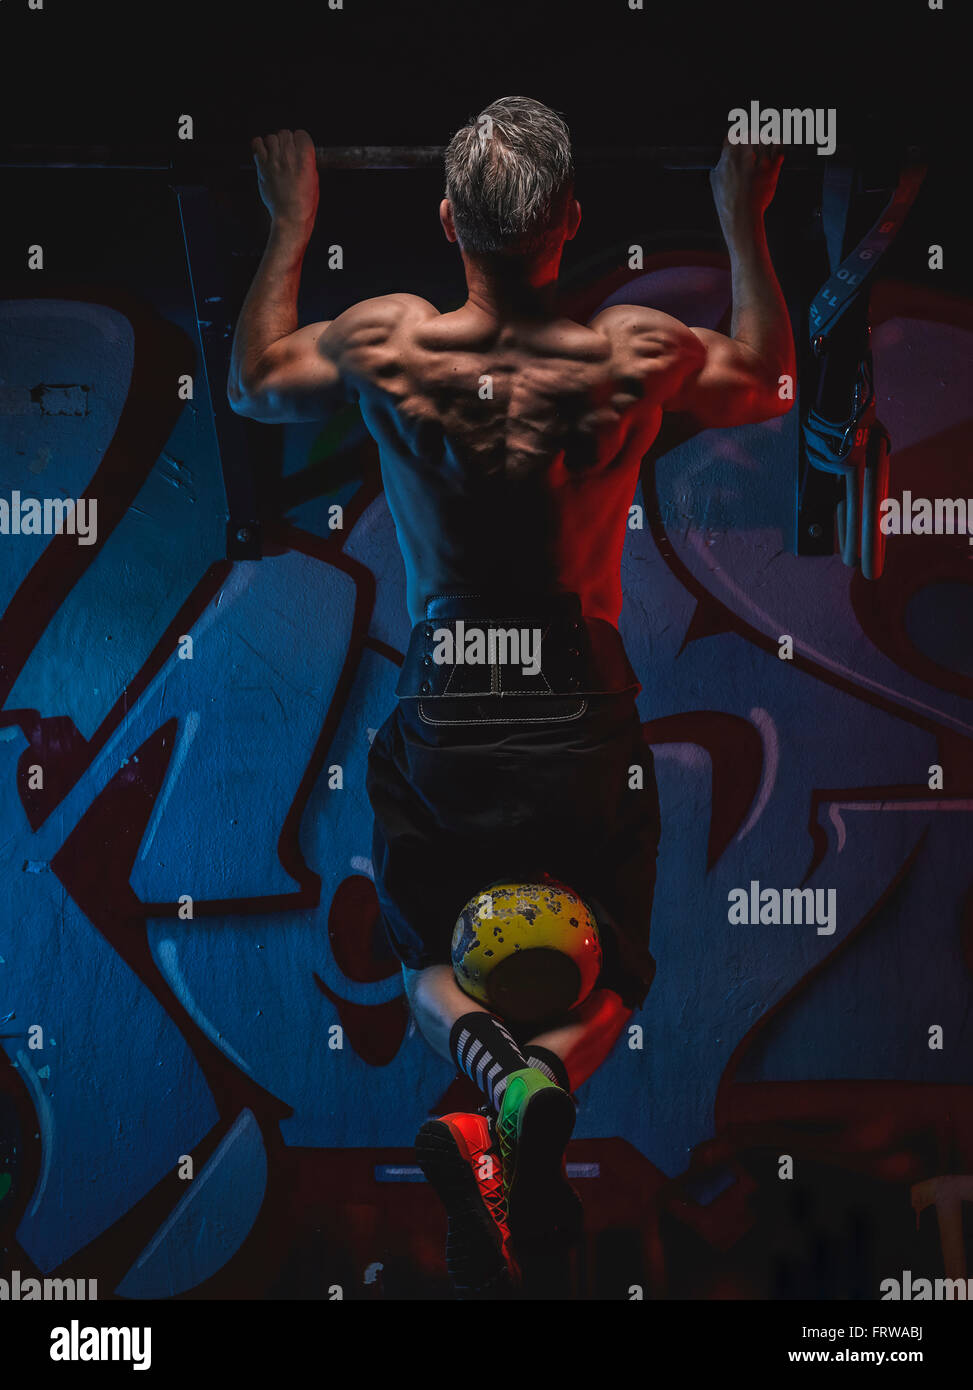 Mature crossfit athlete doing chin-ups with kettlebell Stock Photo